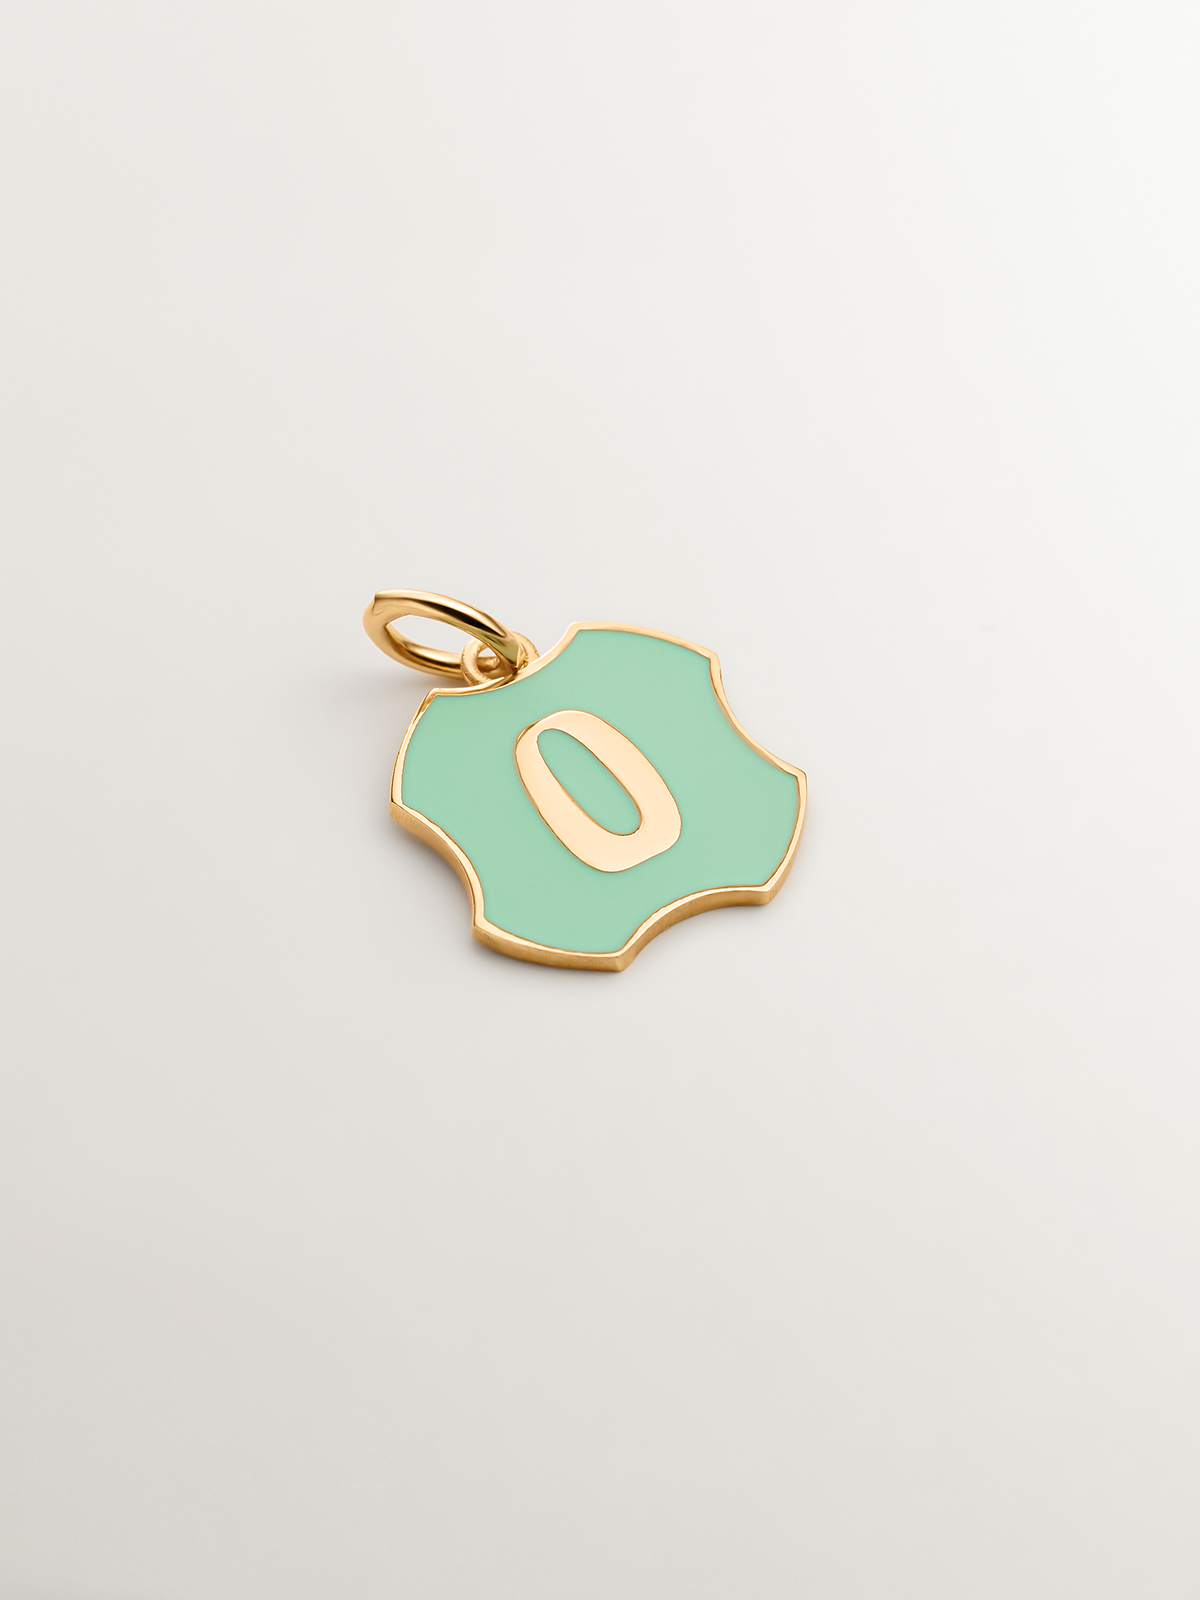 Charm in 925 sterling silver plated in 18K yellow gold with initial O and green enamel with irregular shape